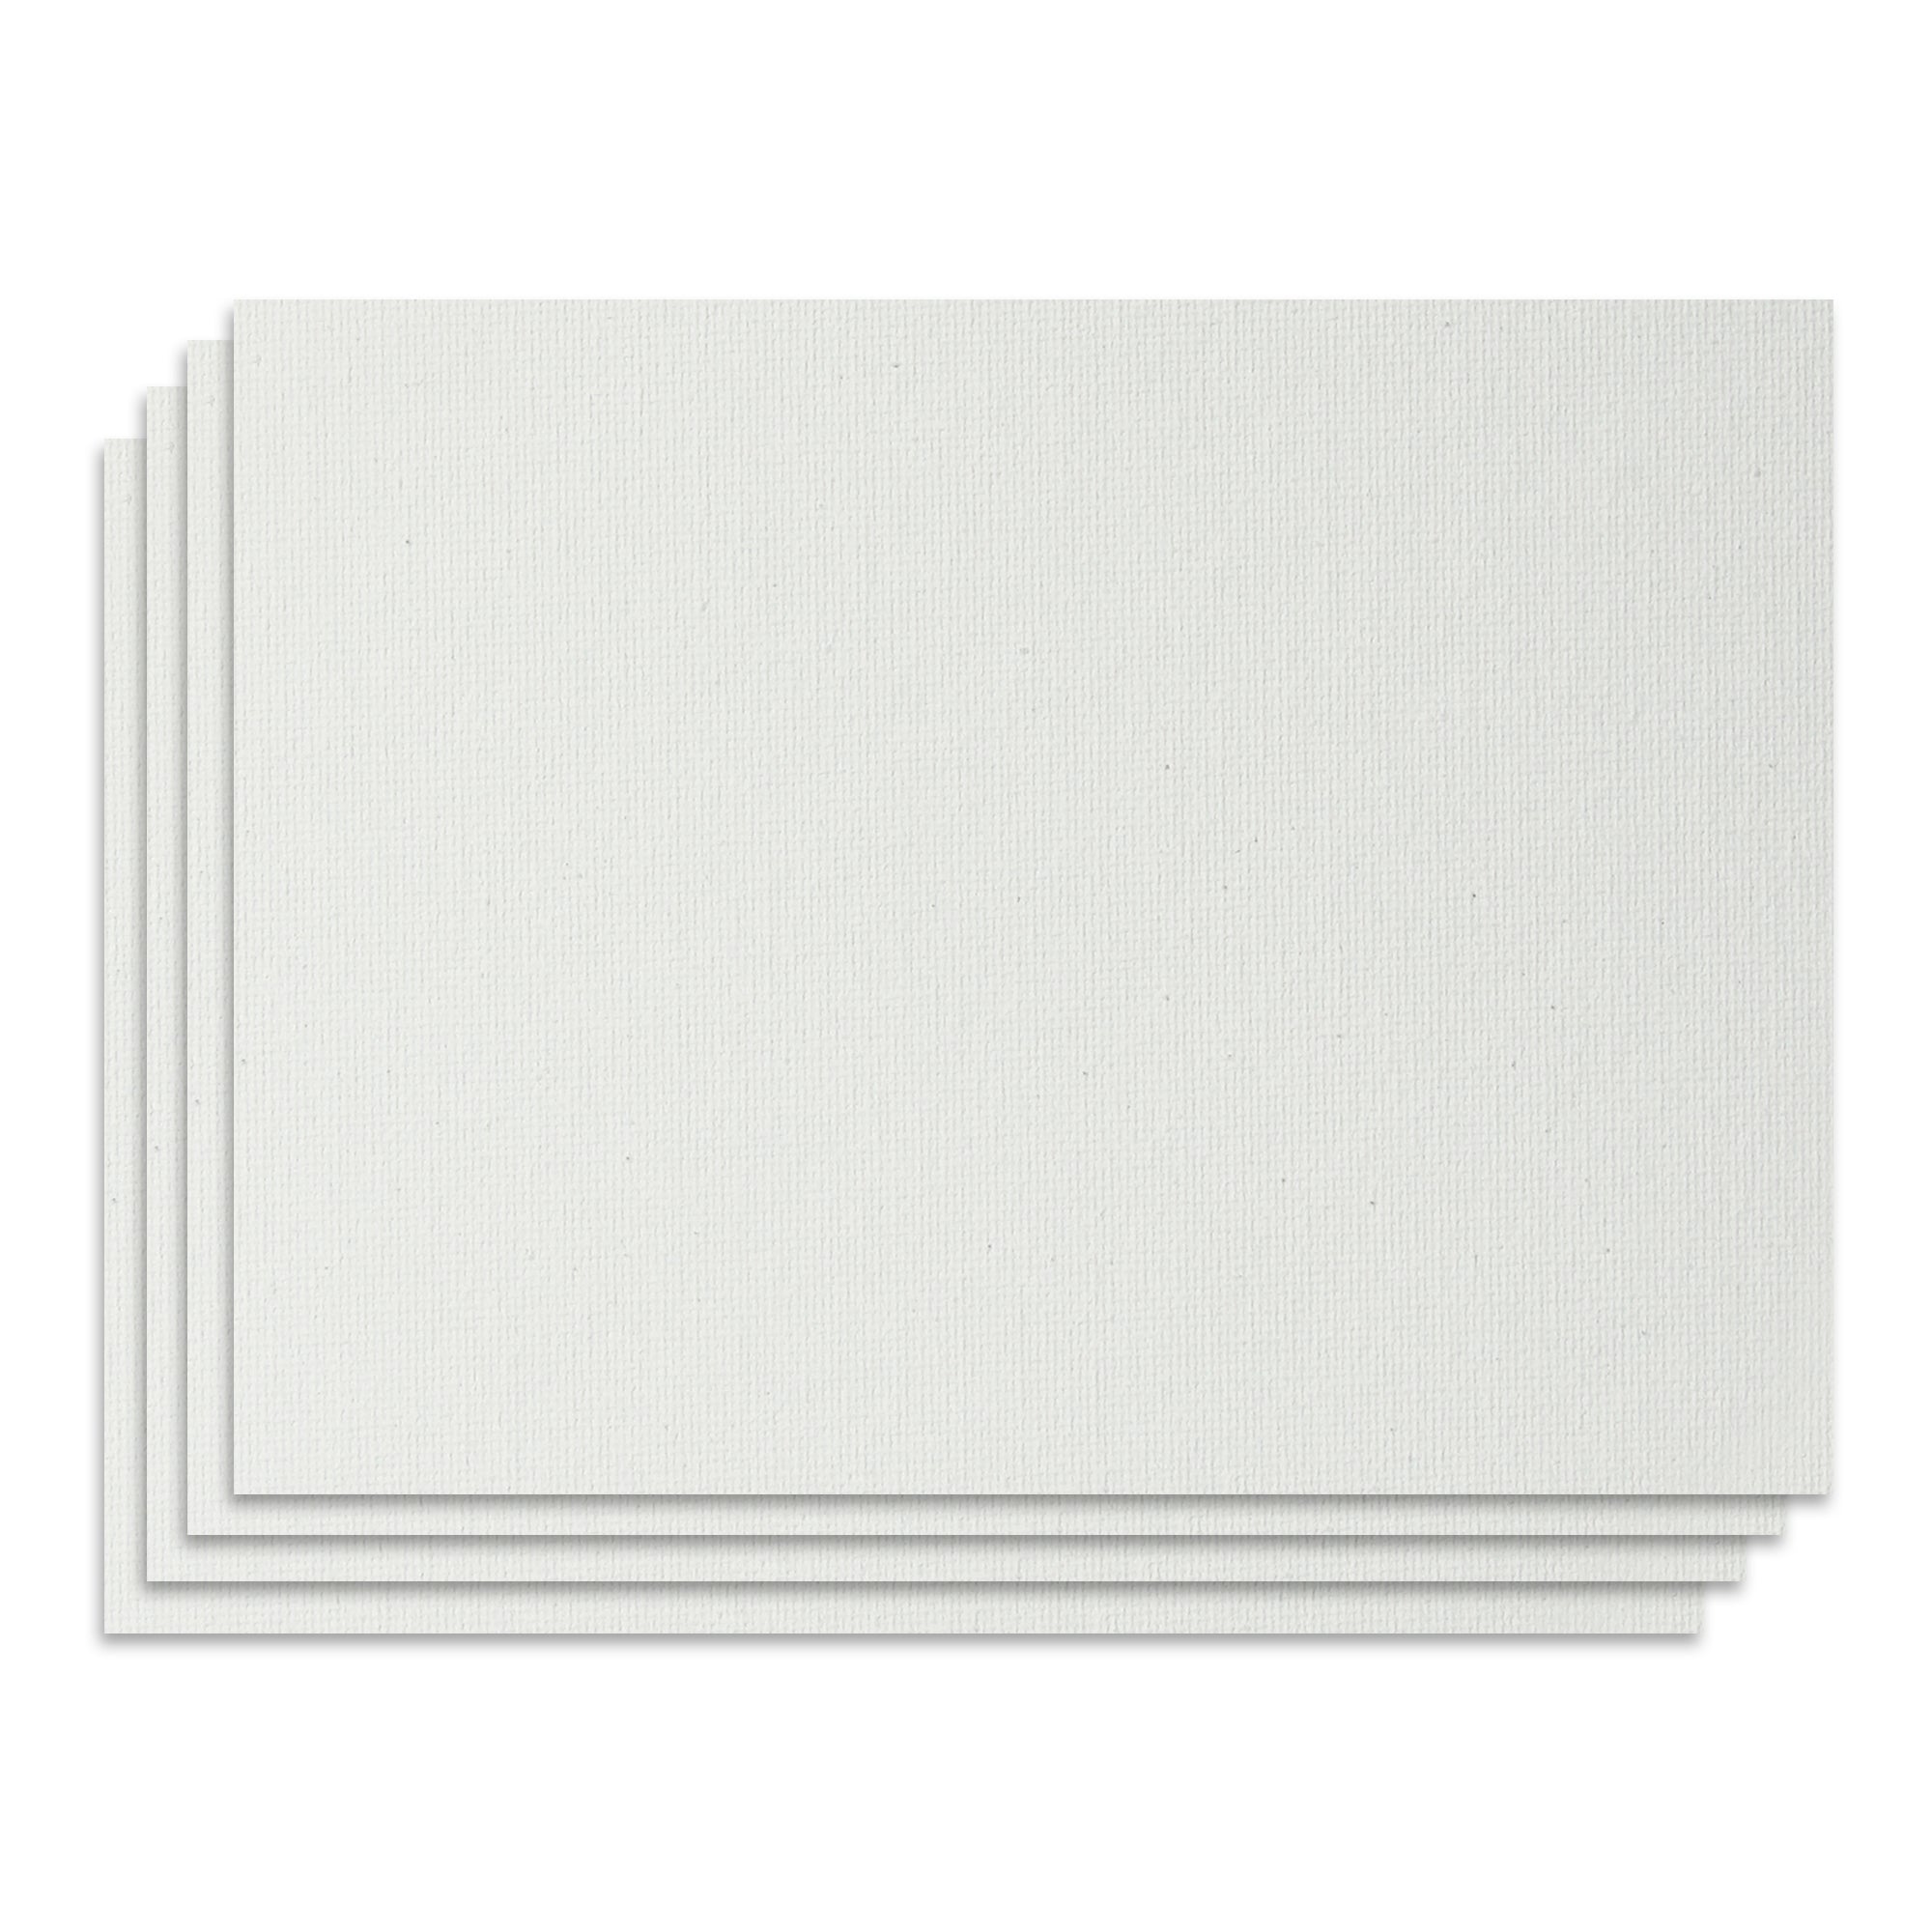 Canvas Board Rectangle 10 X 8Inch 230Gsm 2Mm Thick 4Pc Shrink Lb